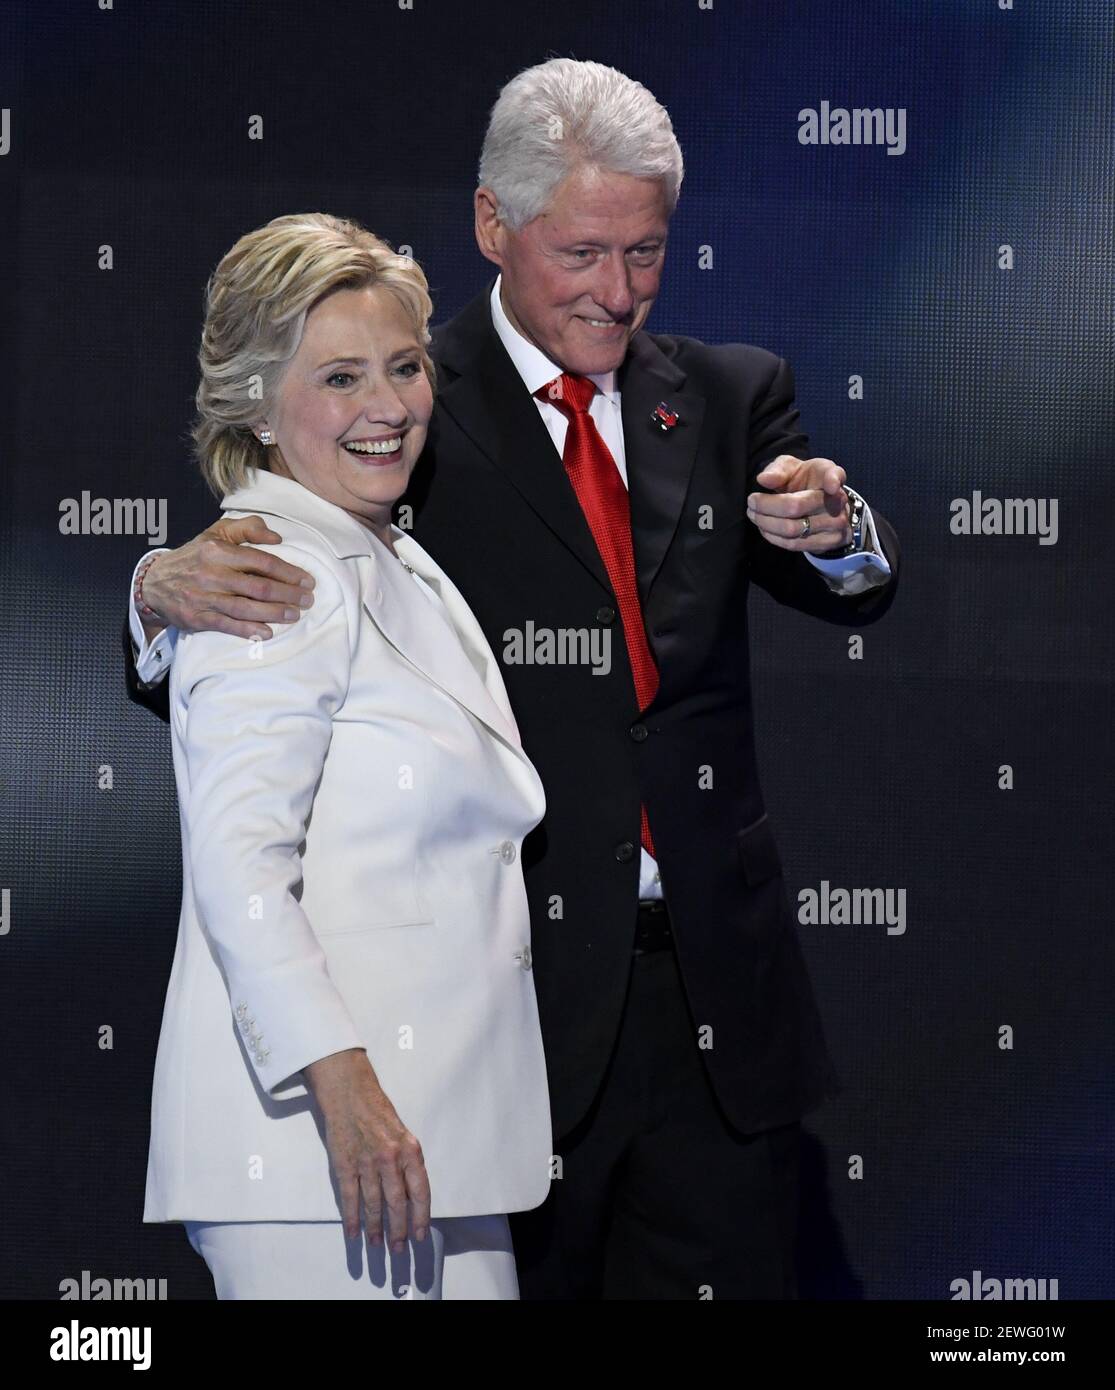 Bill Clinton joins Hillary Clinton on stage after her acceptance speech for the nomination to be President at the Democratic National Convention in Philadelphia on Thursday, July 28, 2016. (Photo By Bill Clark/CQ Roll Call) *** Please Use Credit from Credit Field *** Stock Photo